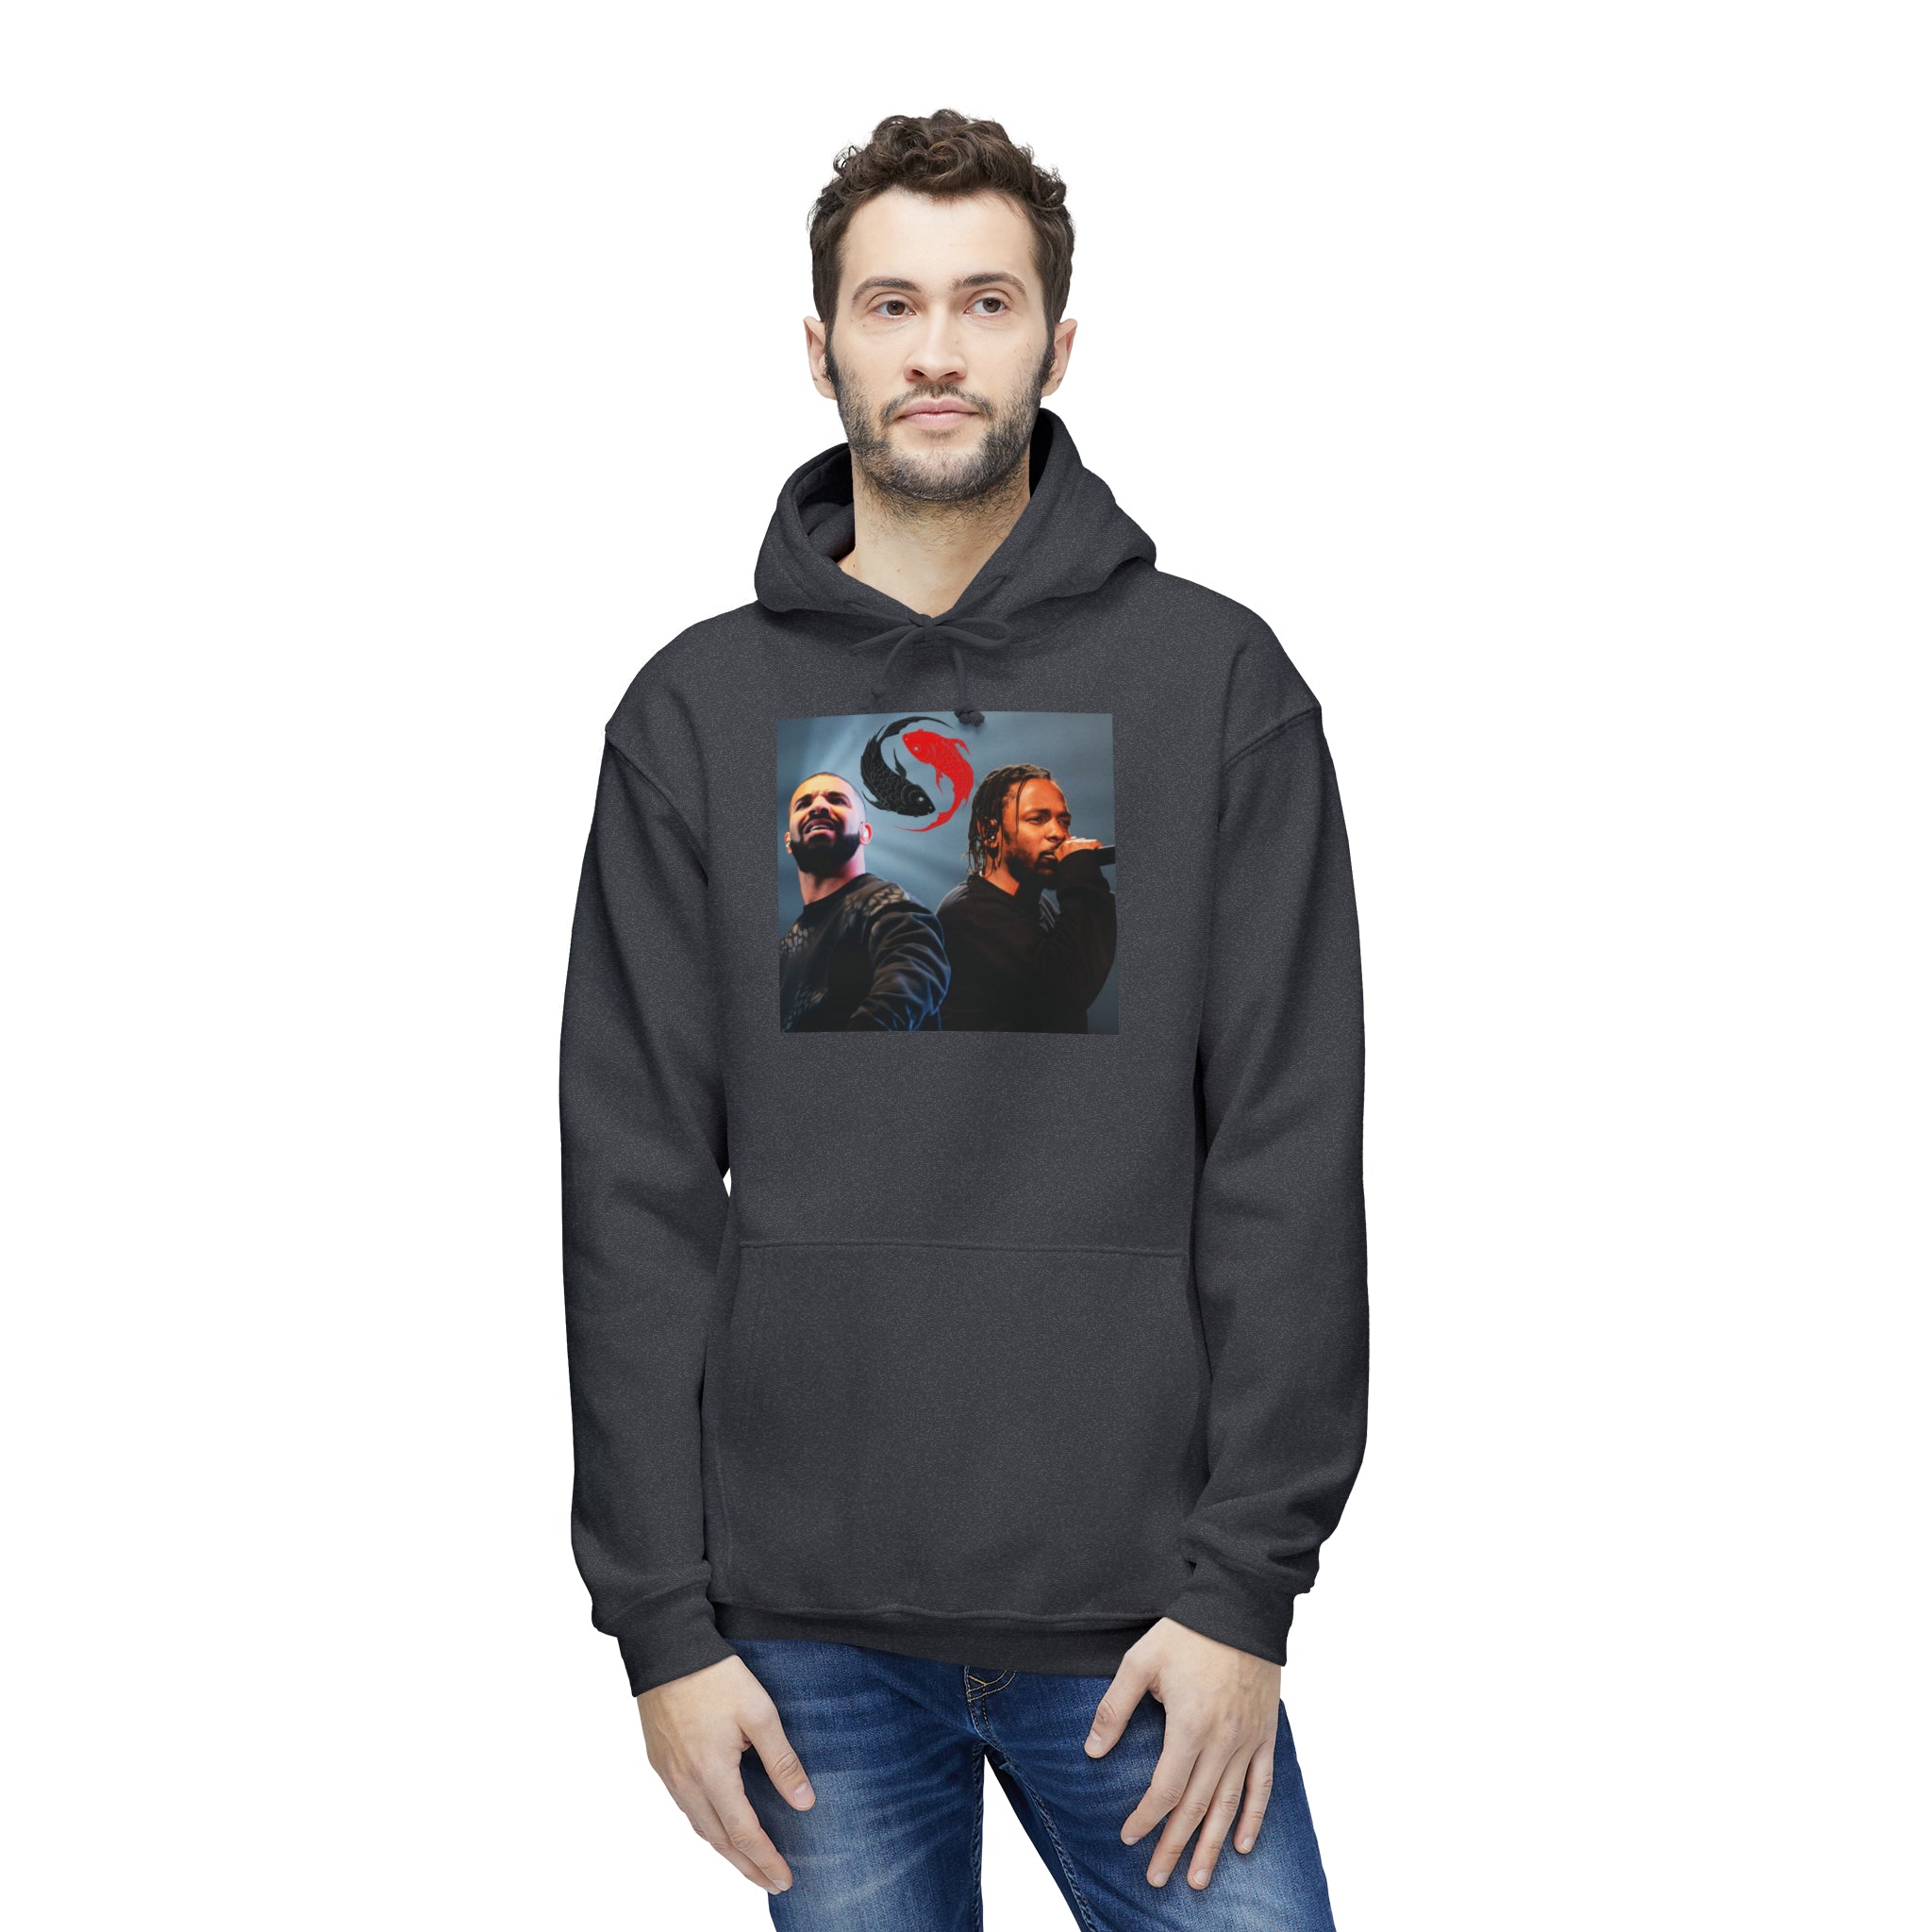 The image presents a cozy, unisex hooded sweatshirt featuring the captivating "Yin and Yang Beef - Drizzy vs. Lamar" design. Made with attention to detail and quality in the US, the hoodie captures the essence of hip-hop rivalry turned mutual admiration, set against a backdrop of soft, durable fabric that promises both style and comfort.